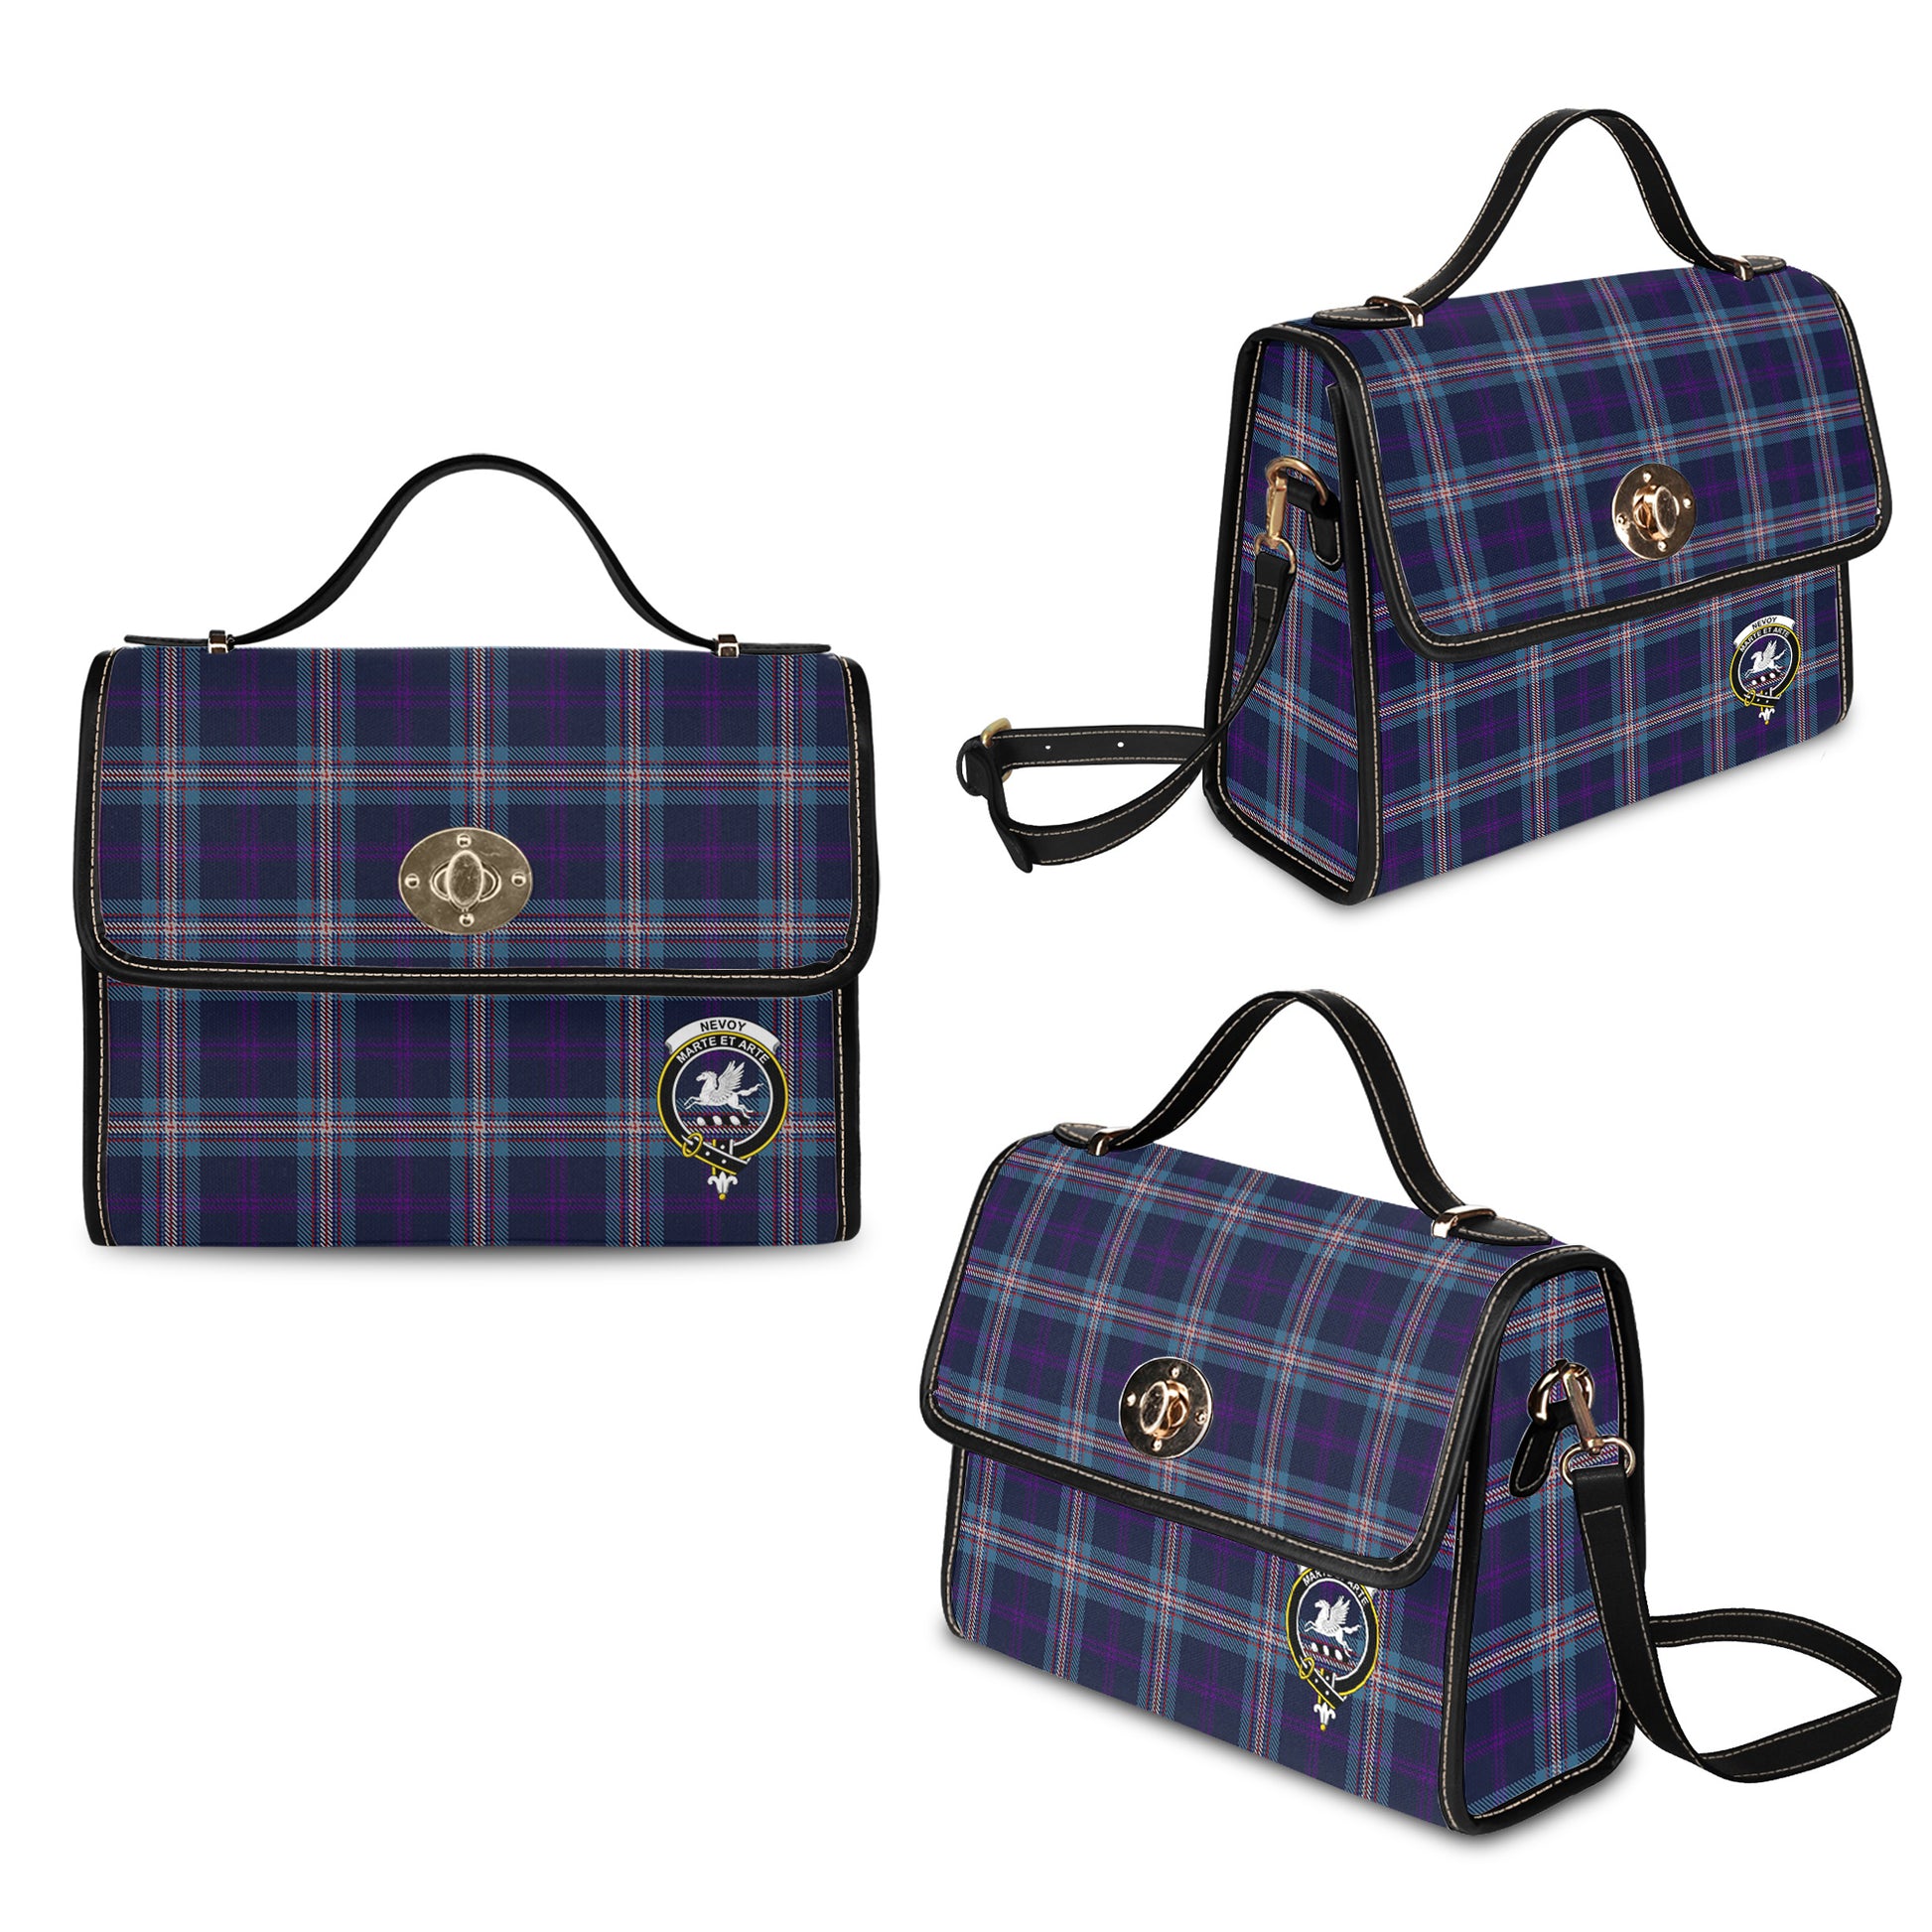 nevoy-tartan-leather-strap-waterproof-canvas-bag-with-family-crest